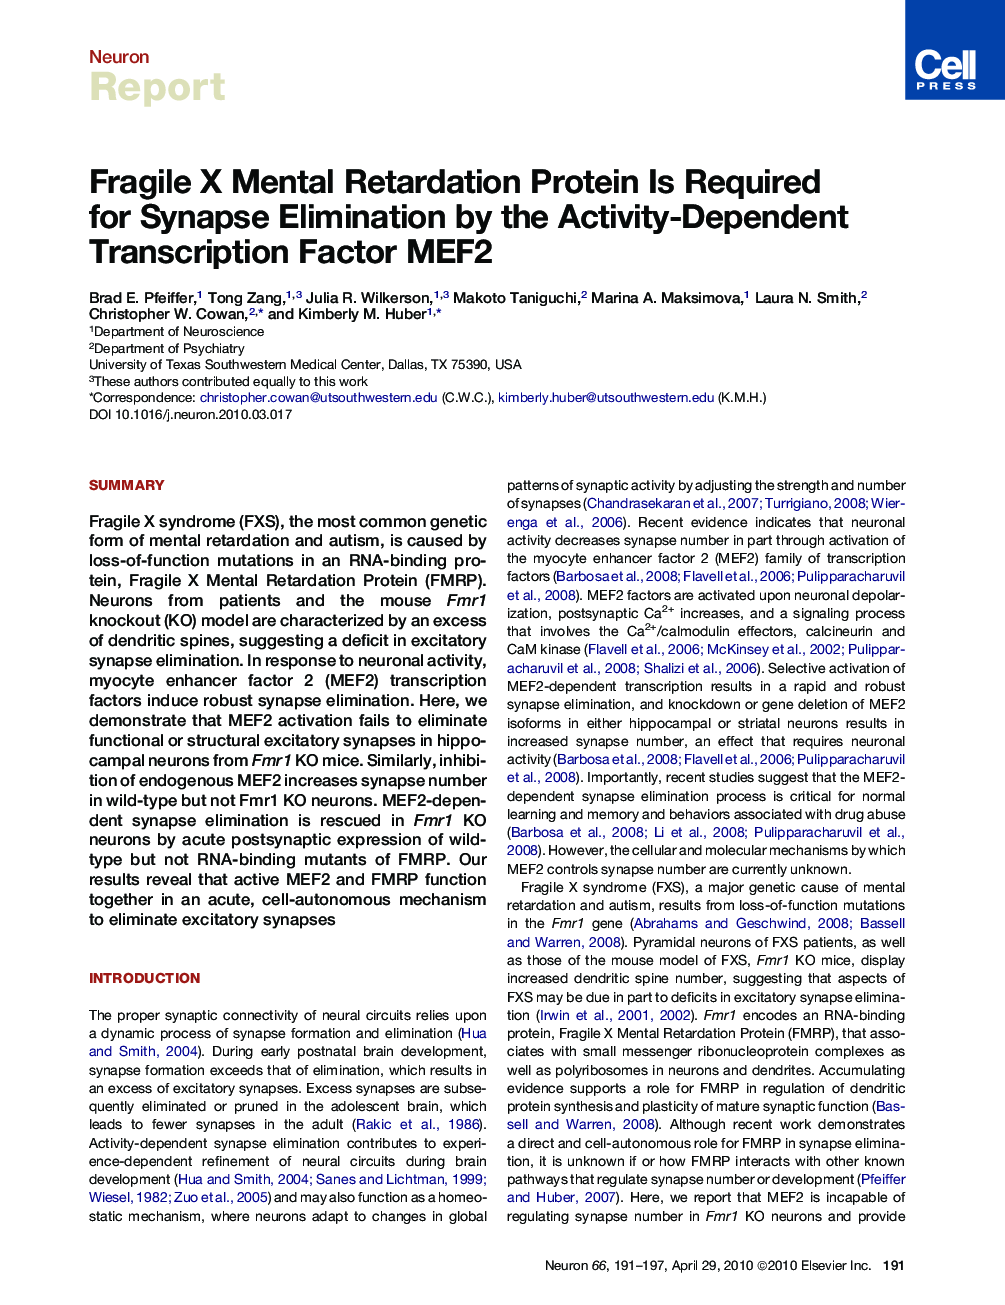 Fragile X Mental Retardation Protein Is Required for Synapse Elimination by the Activity-Dependent Transcription Factor MEF2